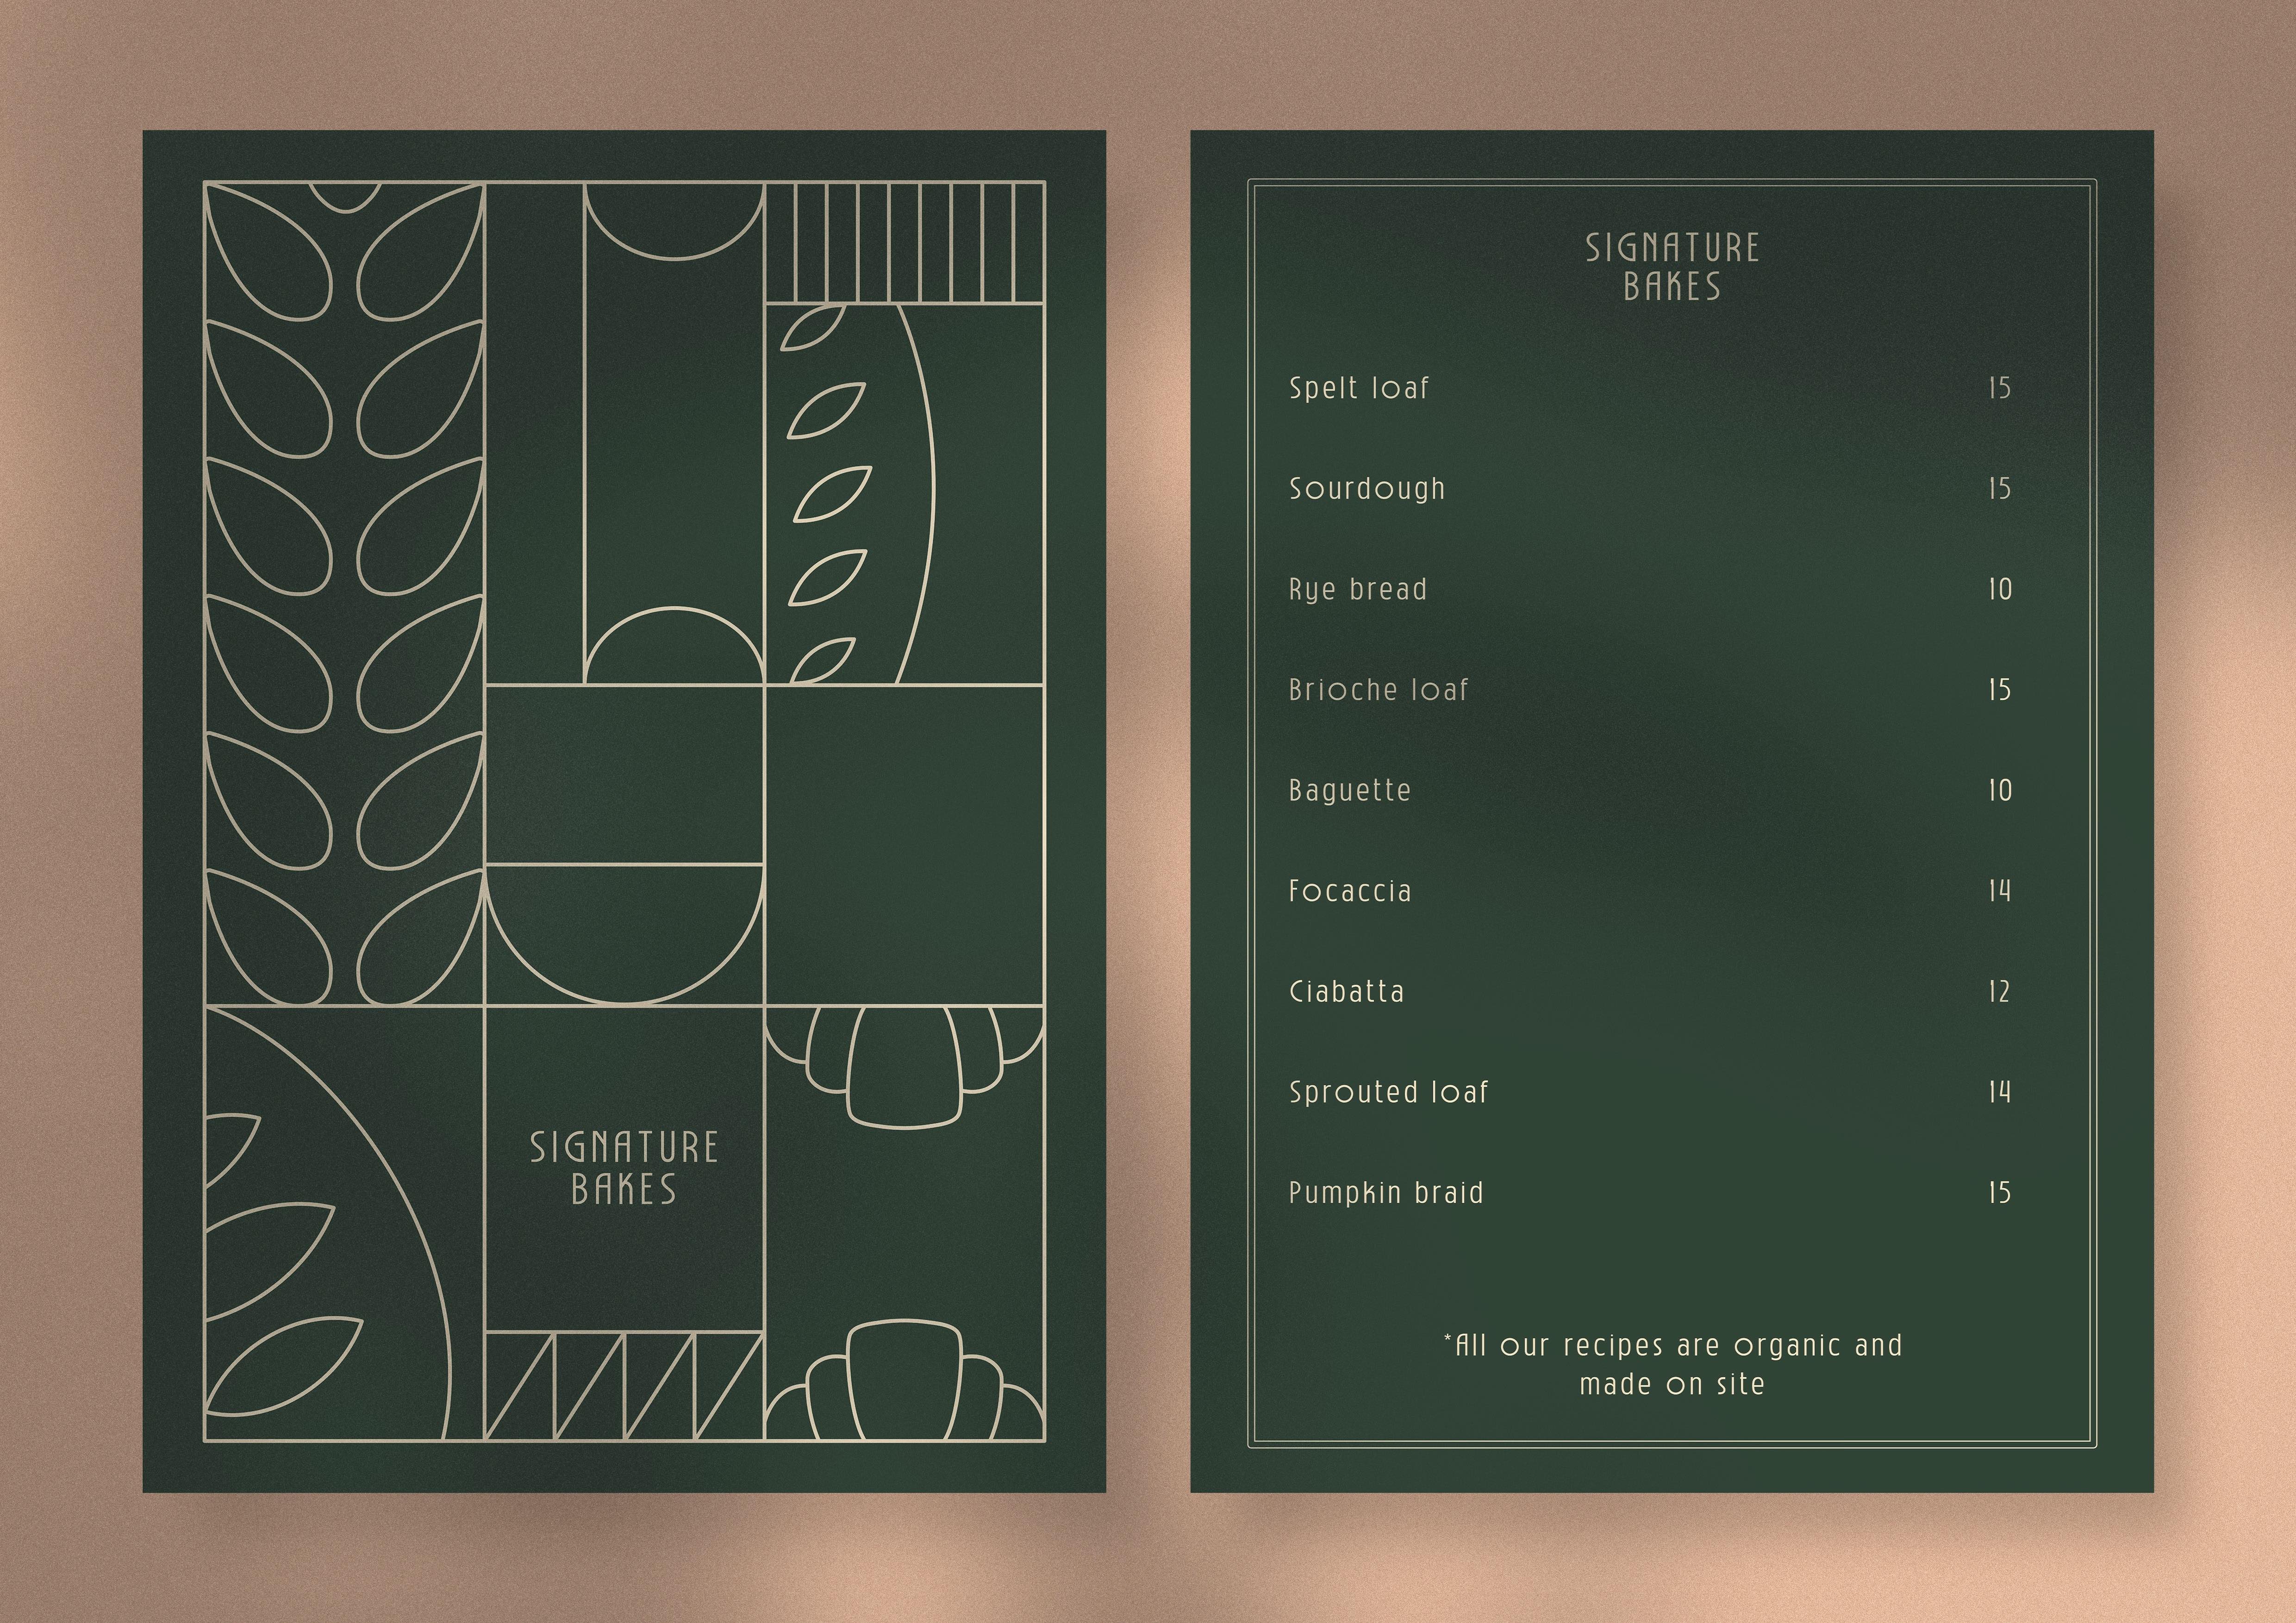 Rising Star Bakery menu in forest green, featuring an Art Deco pattern and typeface, in cream.